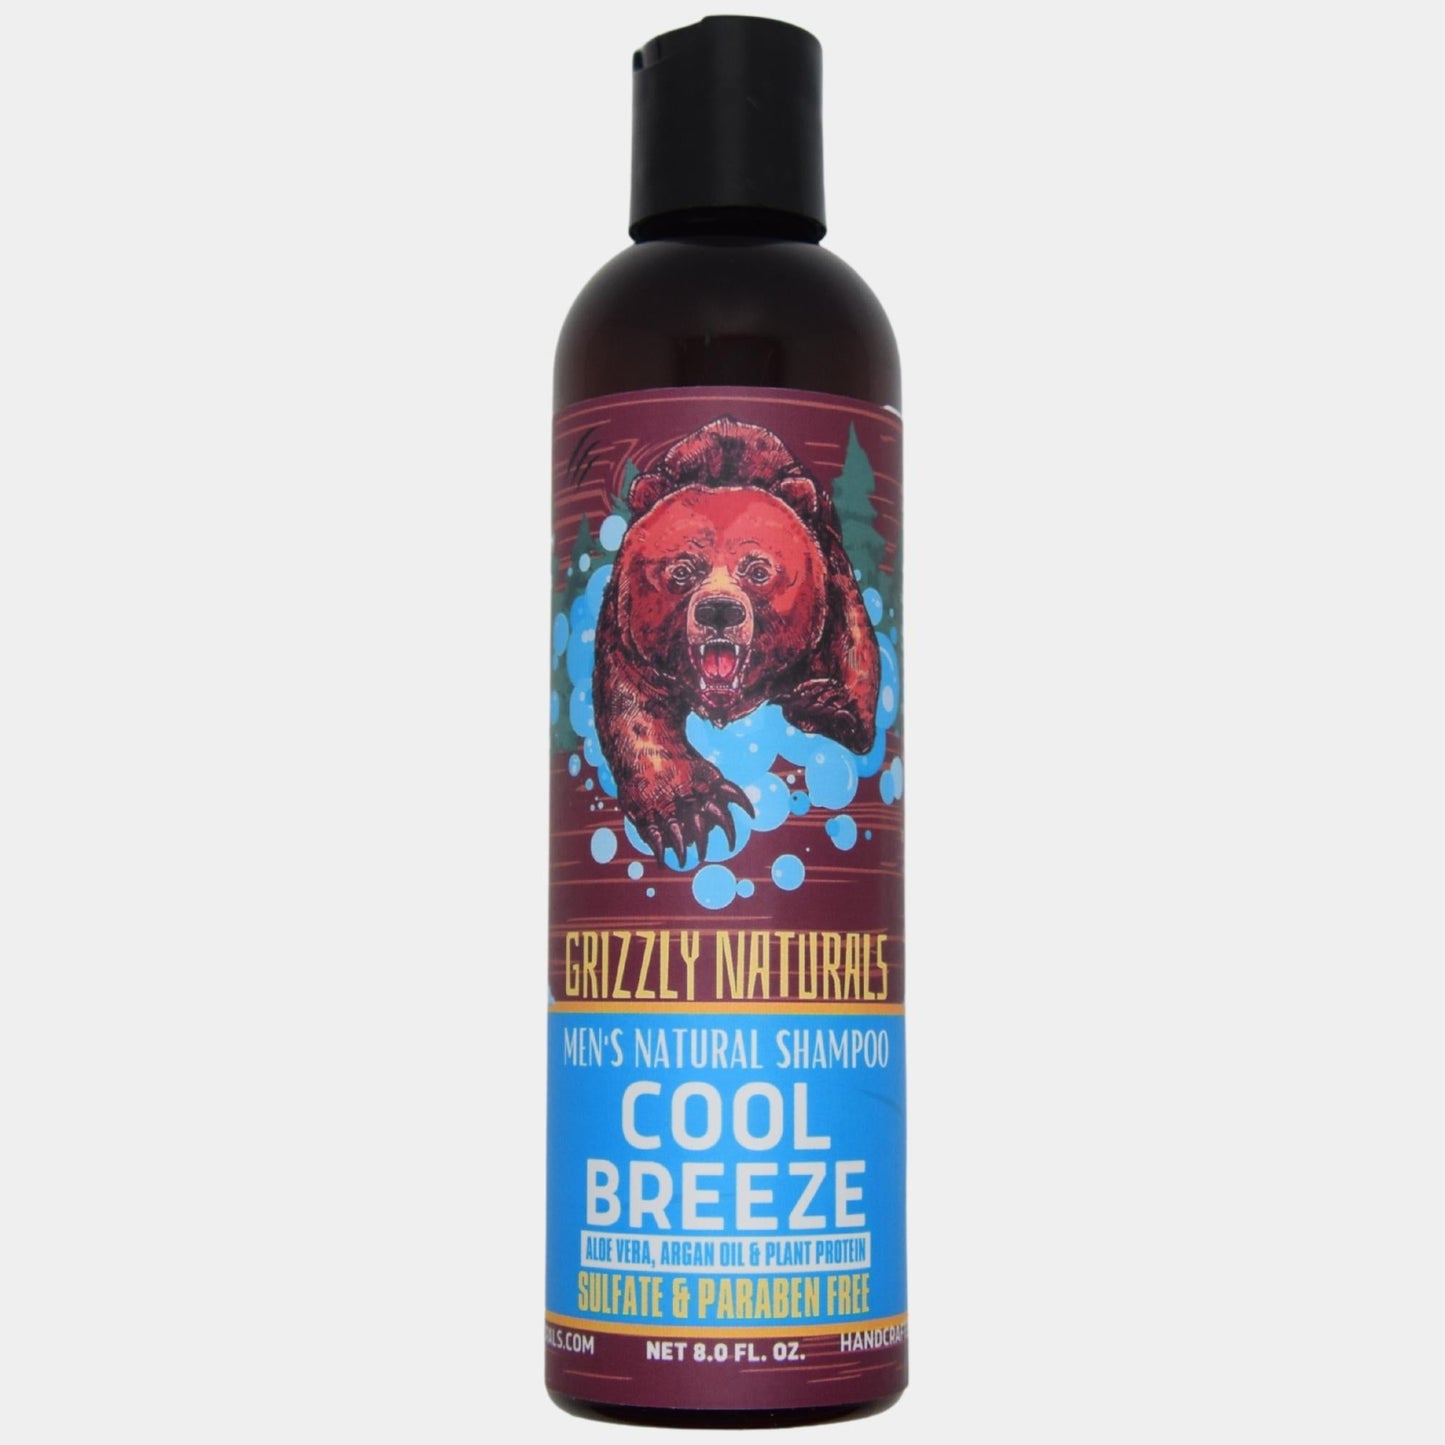 Cool Breeze Shampoo - Grizzly Naturals Soap Company